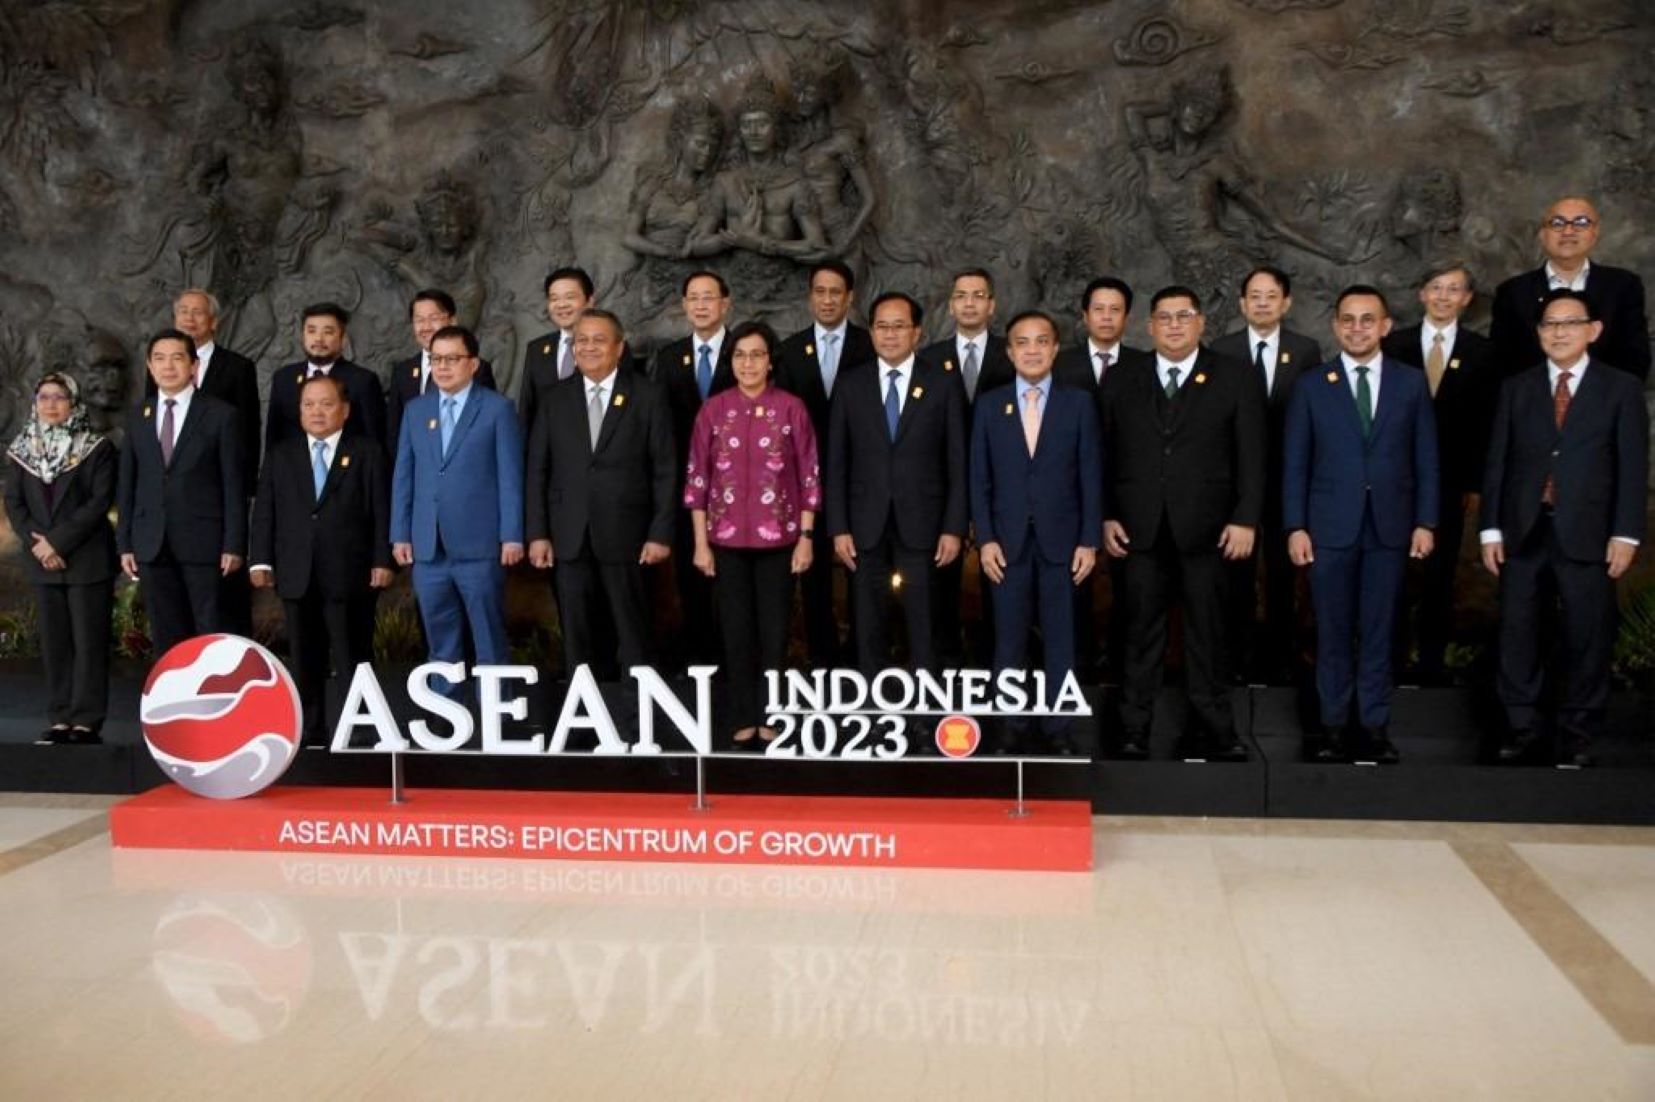 ASEAN Summit Expected To Highlight Economic Growth, ASEAN Centrality, De-Dollarisation